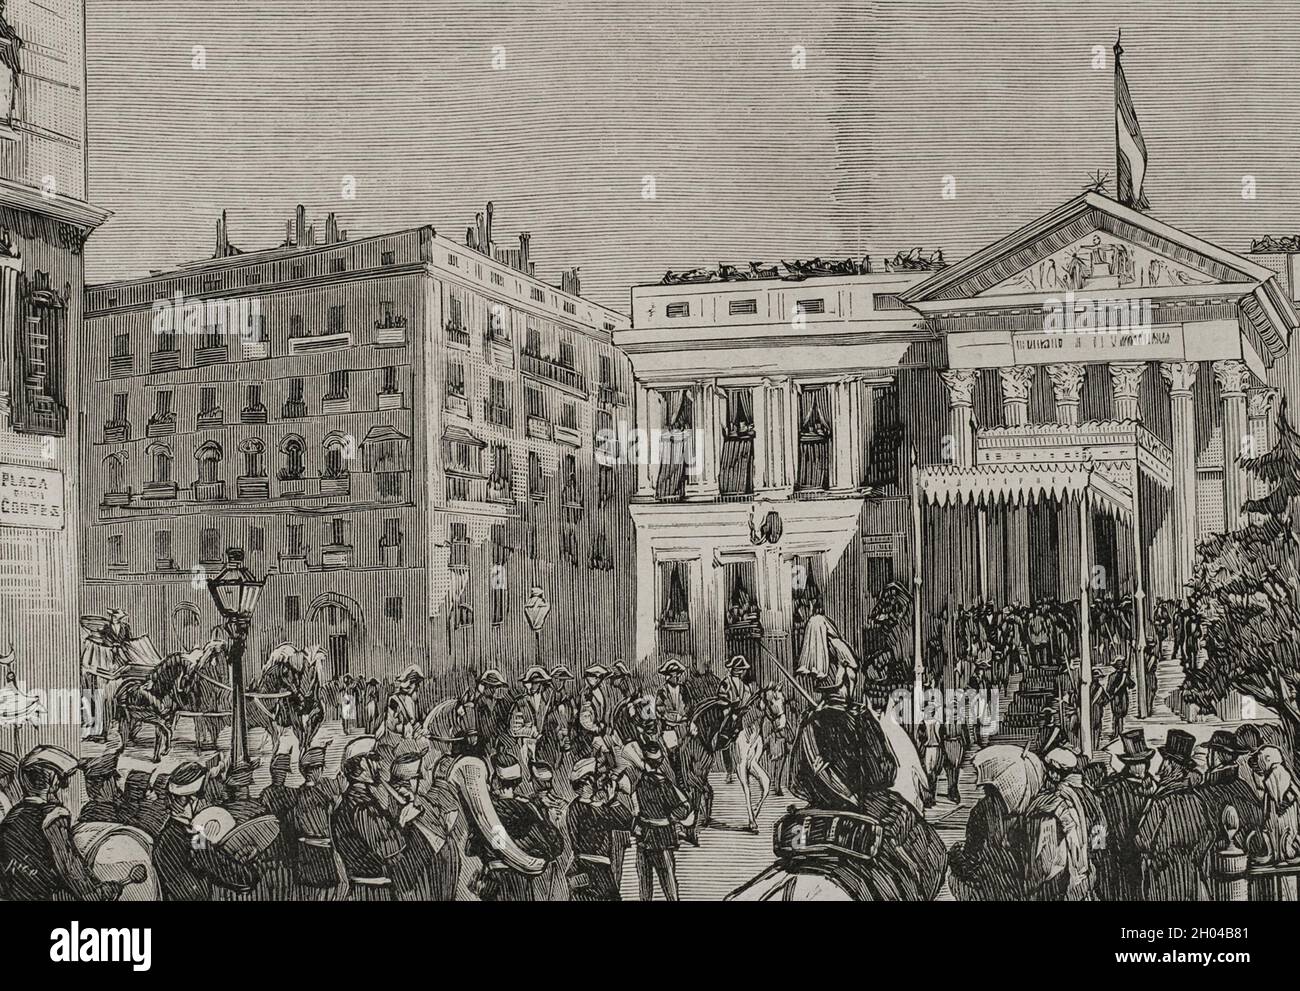 History of Spain. Madrid. Opening of the Spanish Courts on February 15, 1878. Arrival of the King and Queen at the Palace of the Courts. Drawing from life by Ferrant. Engraving. La Ilustración Española y Americana, 1878. Stock Photo